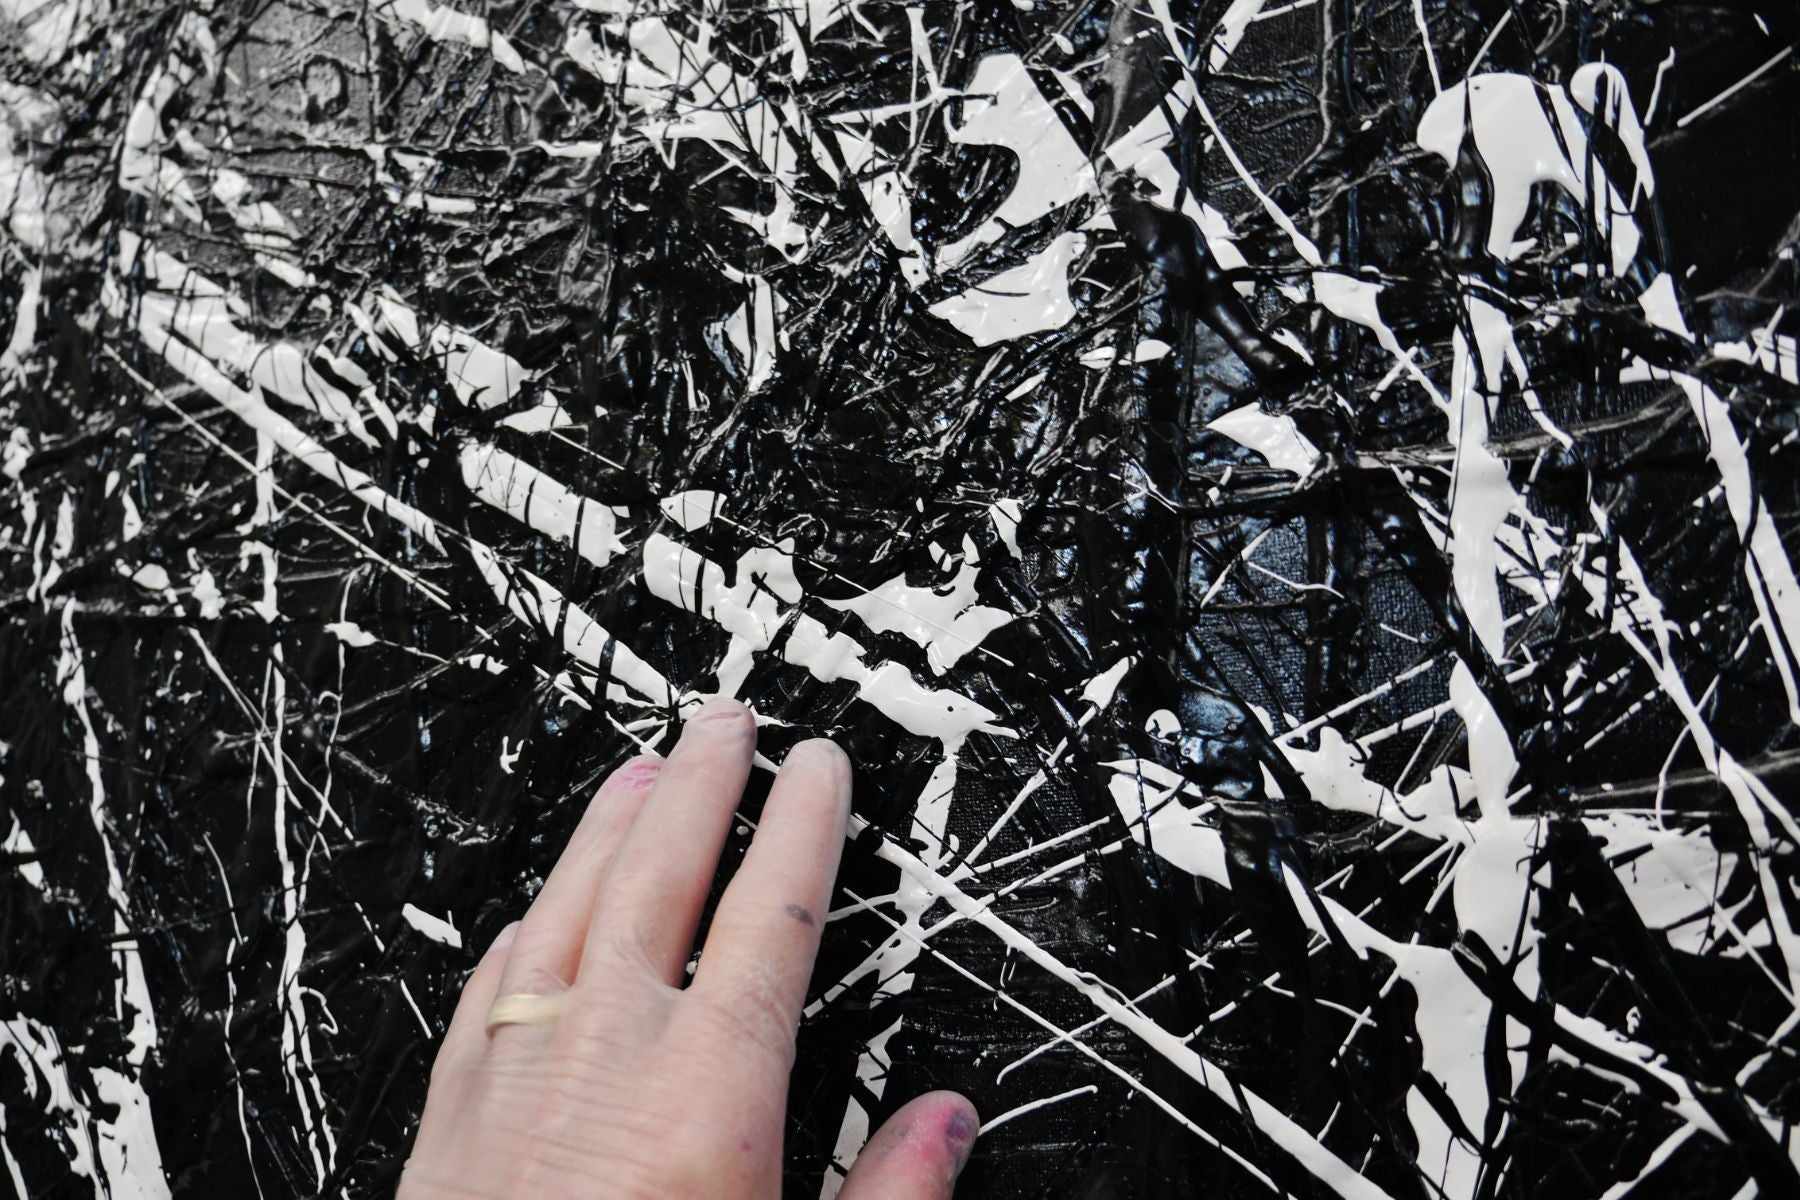 Scatter Brainer 240cm x 100cm Black White Minimalist Textured Abstract Painting (SOLD)